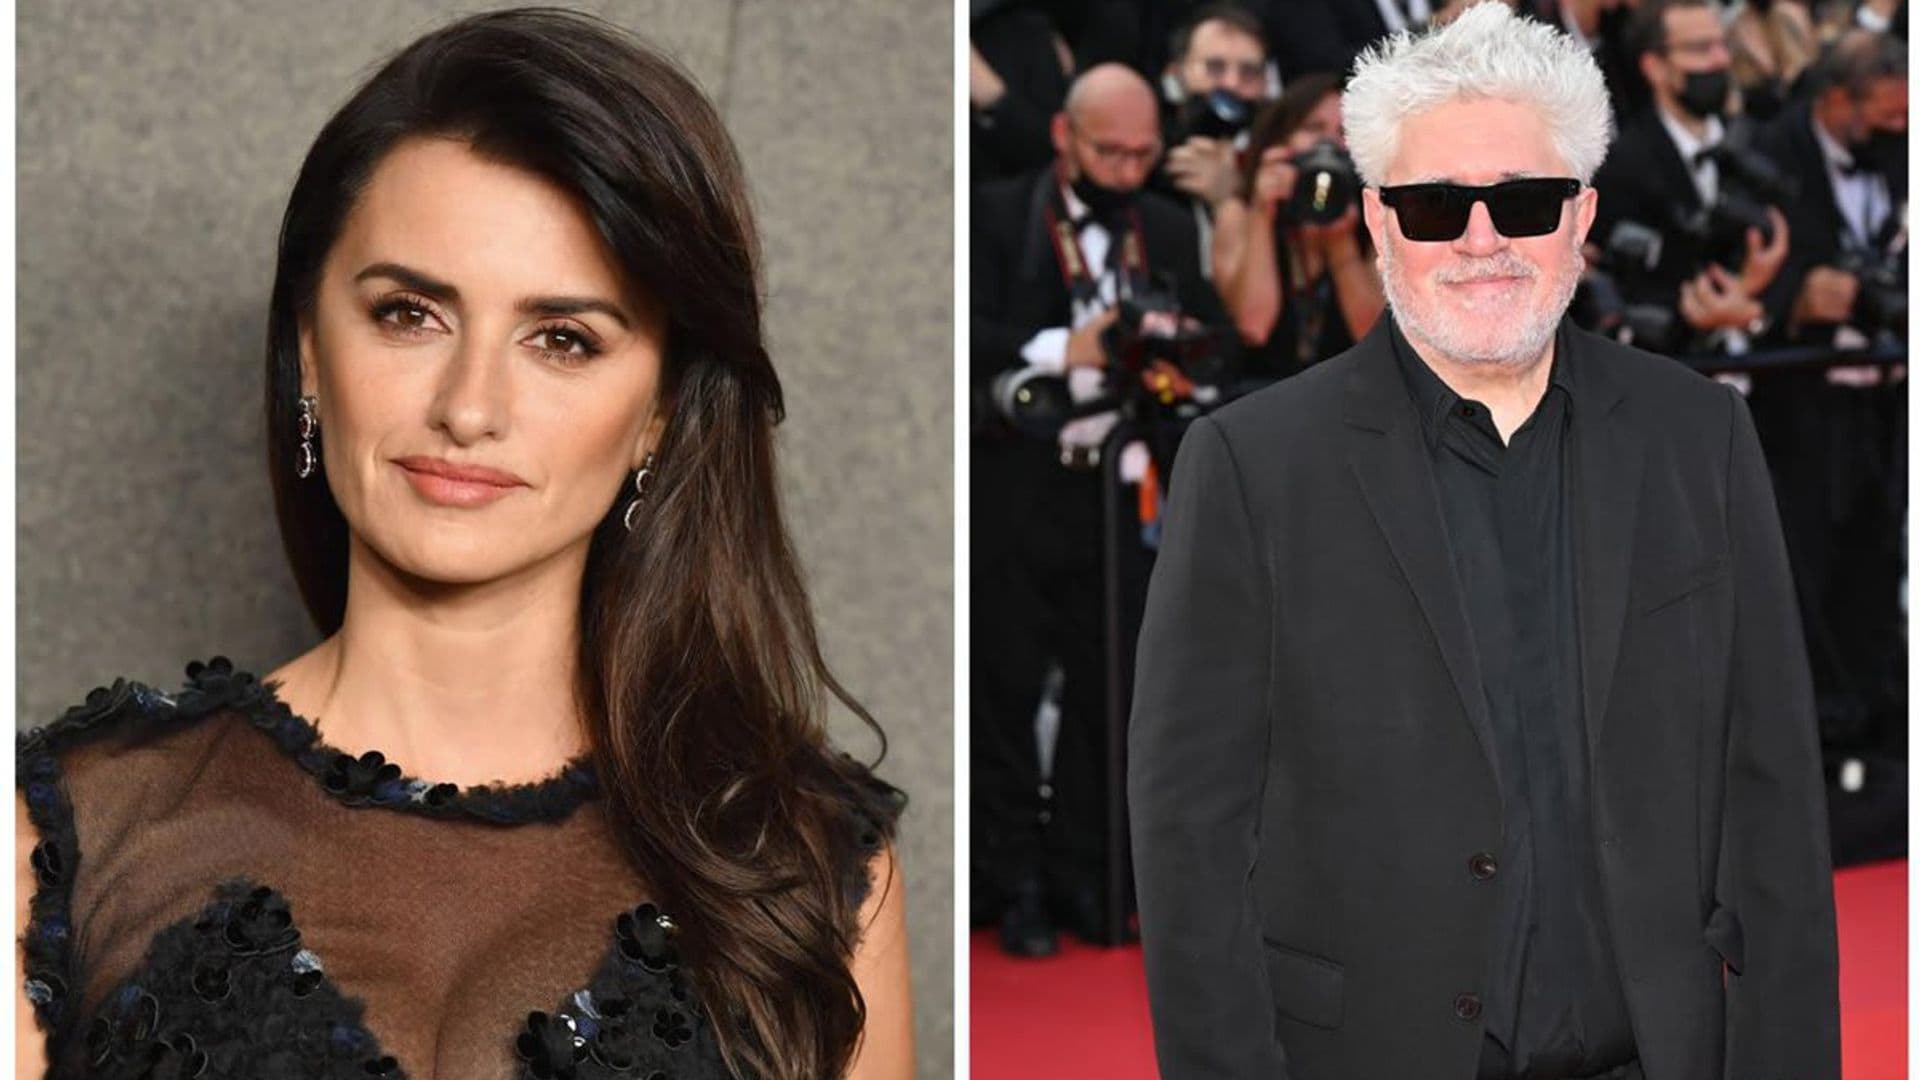 Penelope Cruz’s new film, ‘Parallel Mothers’ by Pedro Almodovar is set to open the Venice Film Festival